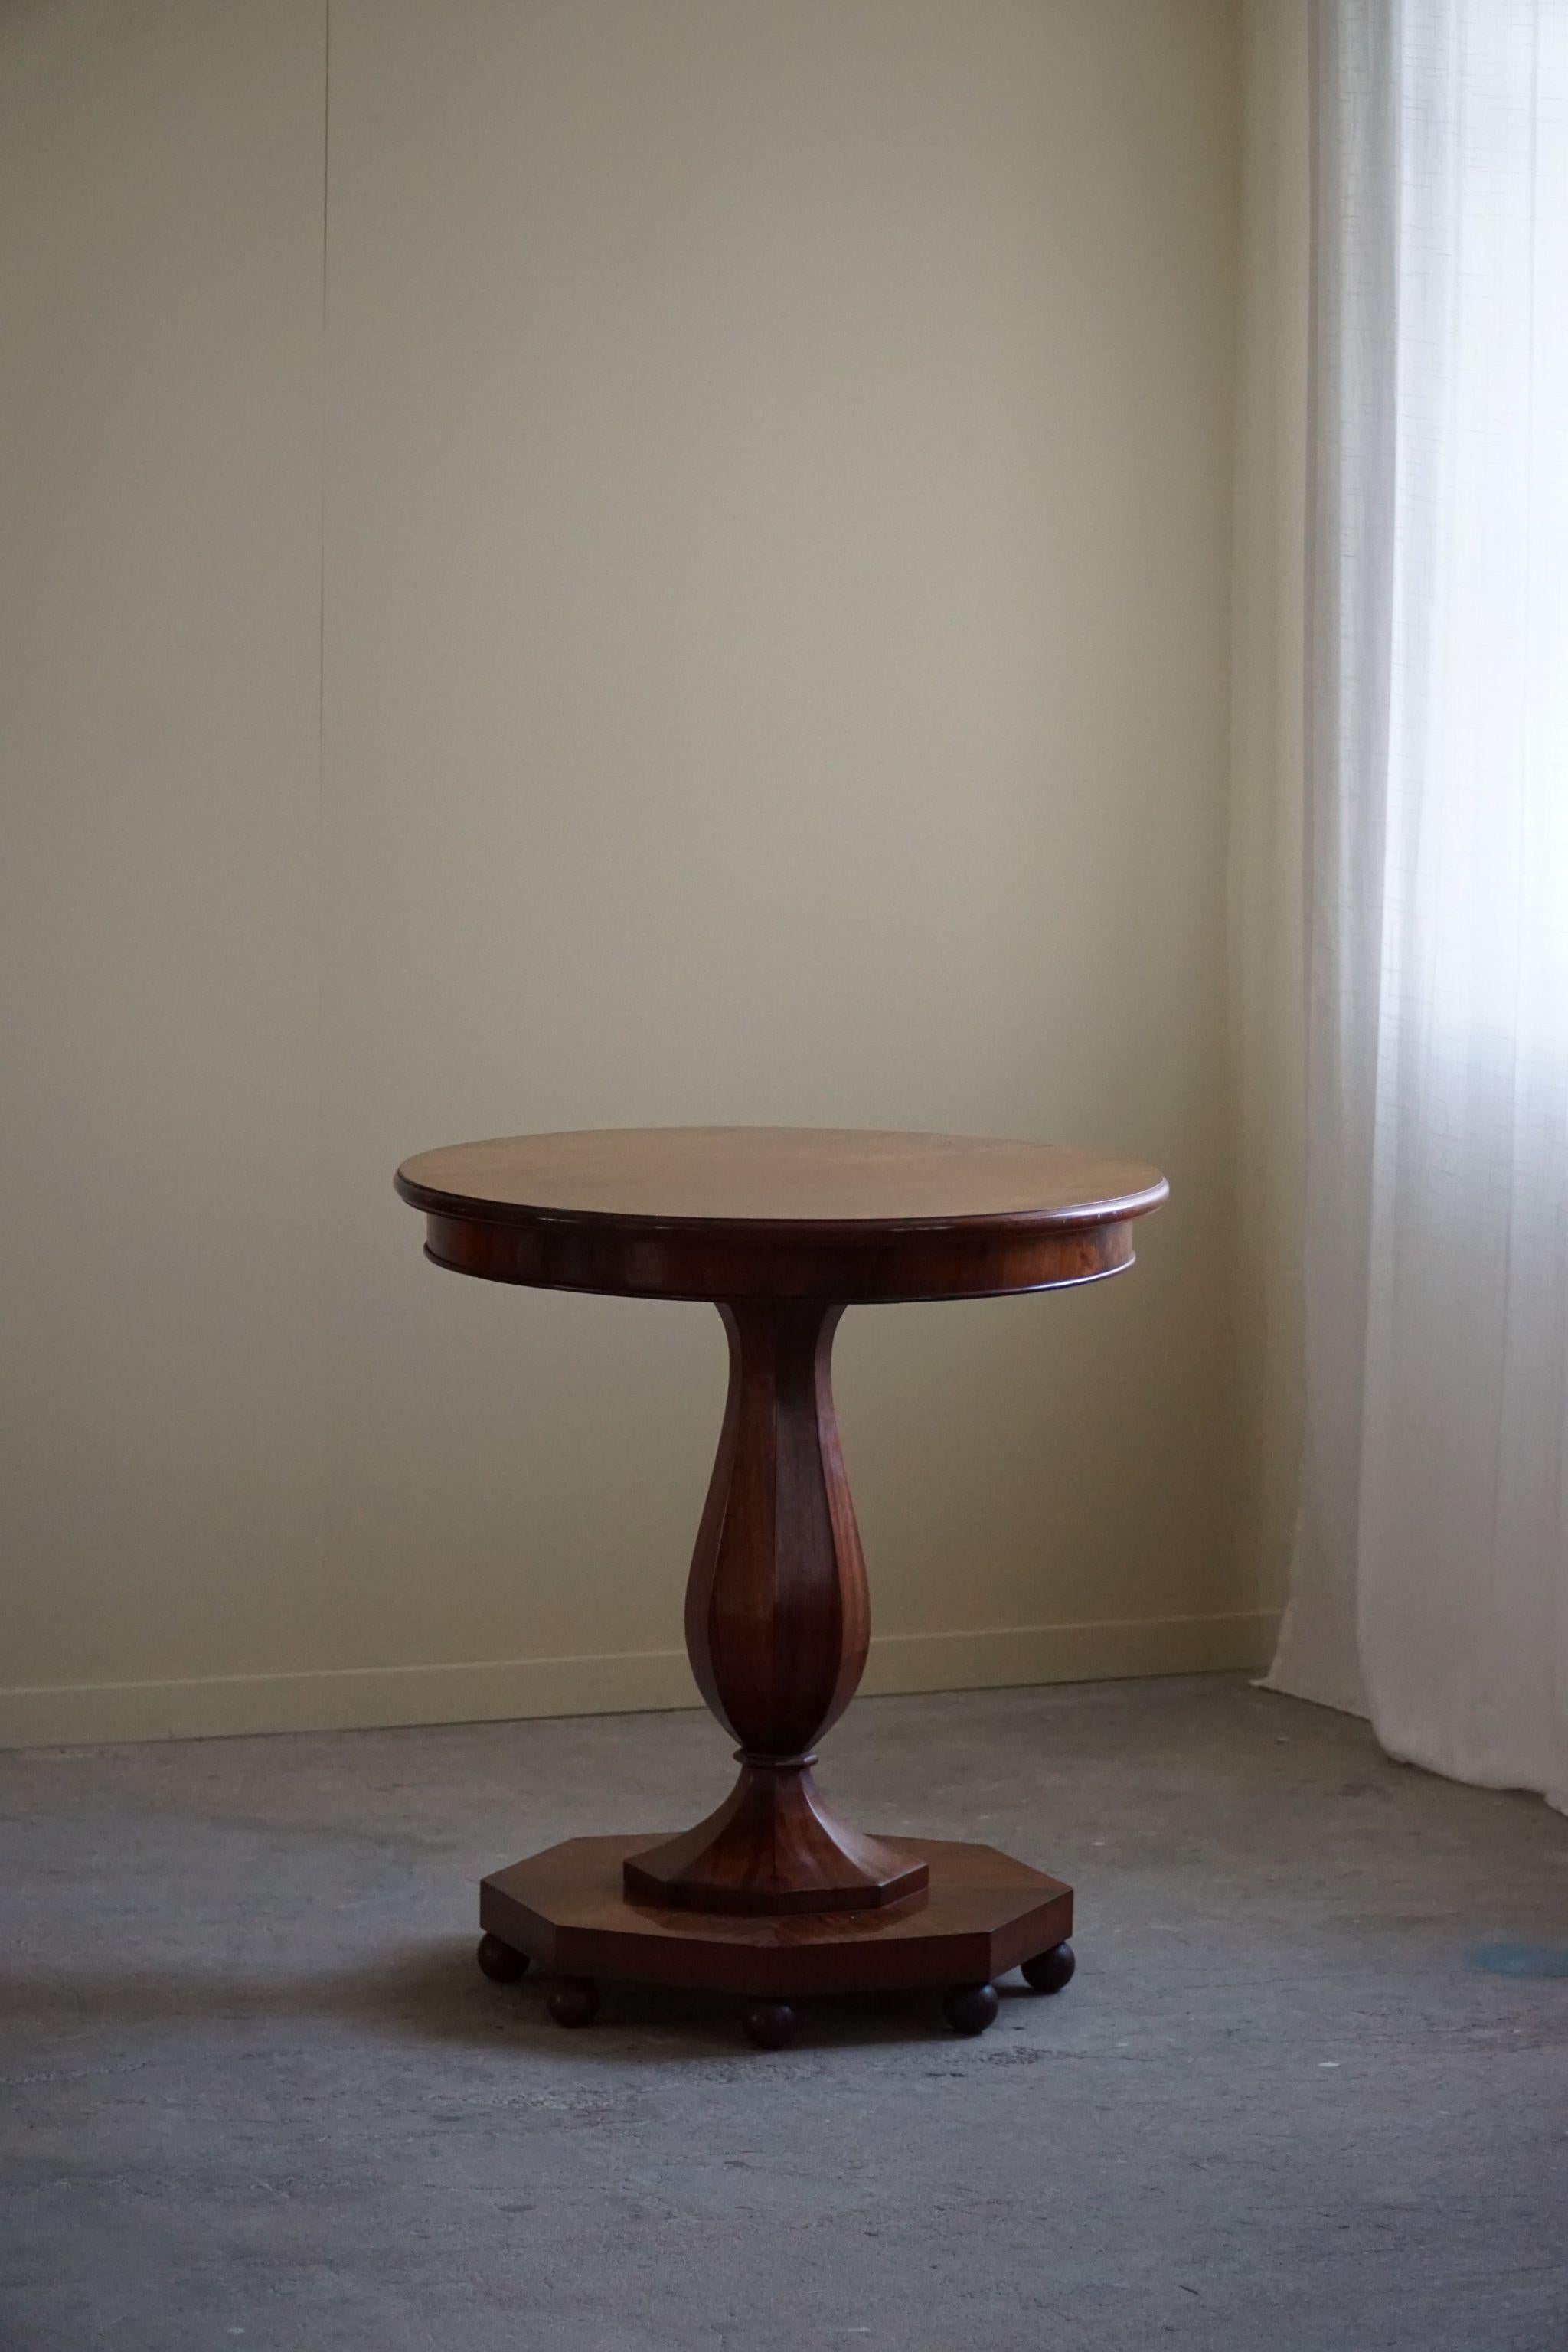 Art Deco, Round Pedestal / Side Table in Walnut, By a Danish Cabinetmaker, 1940s For Sale 6